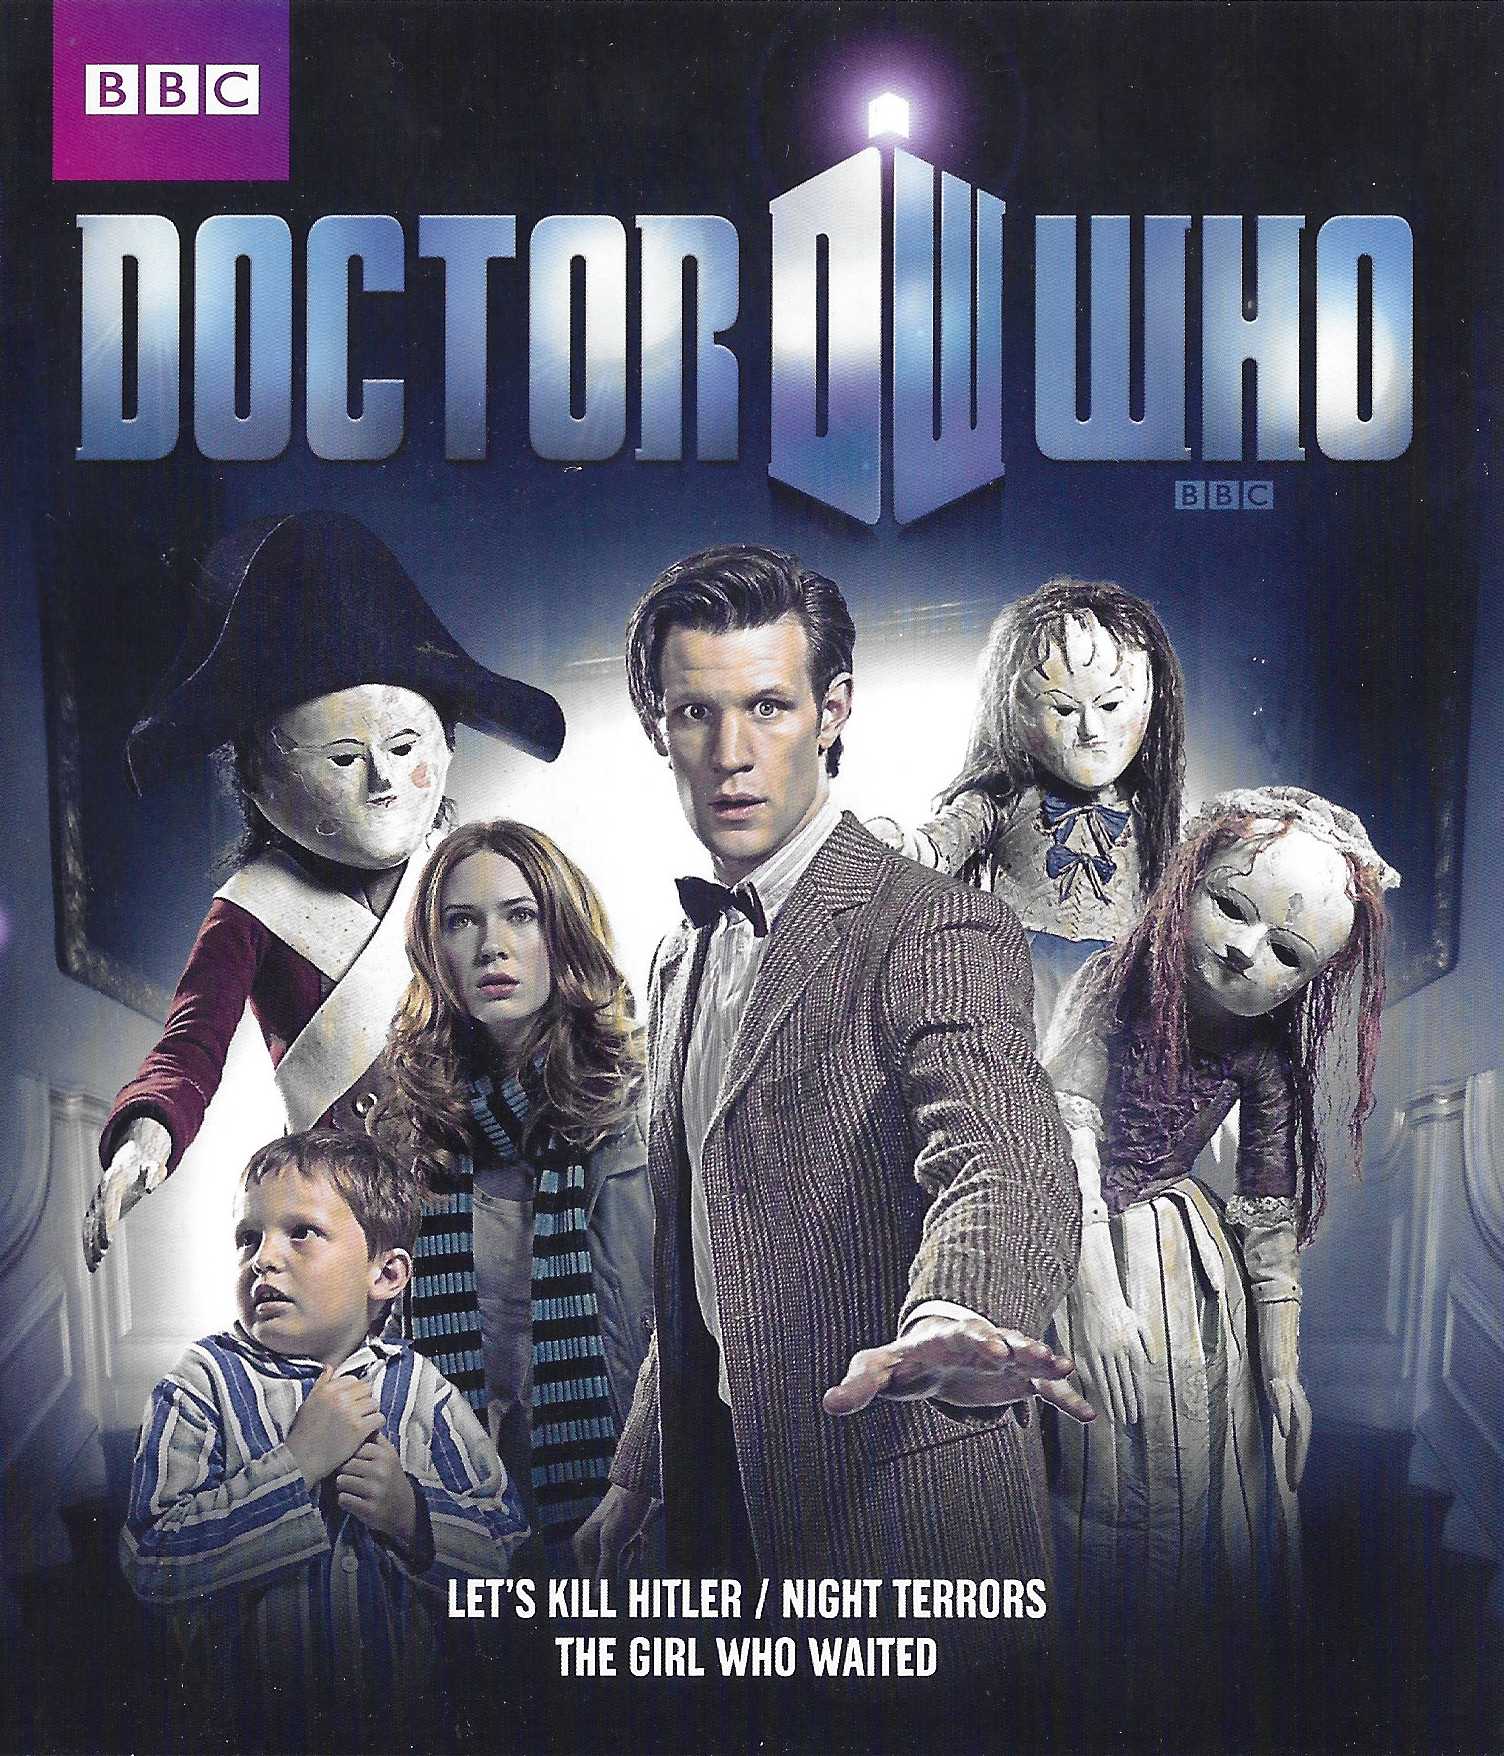 Picture of BBCBD 0152A Doctor Who - Series 6, part 2a by artist Steven Moffat / Mark Gatiss / Tom Macrae from the BBC records and Tapes library